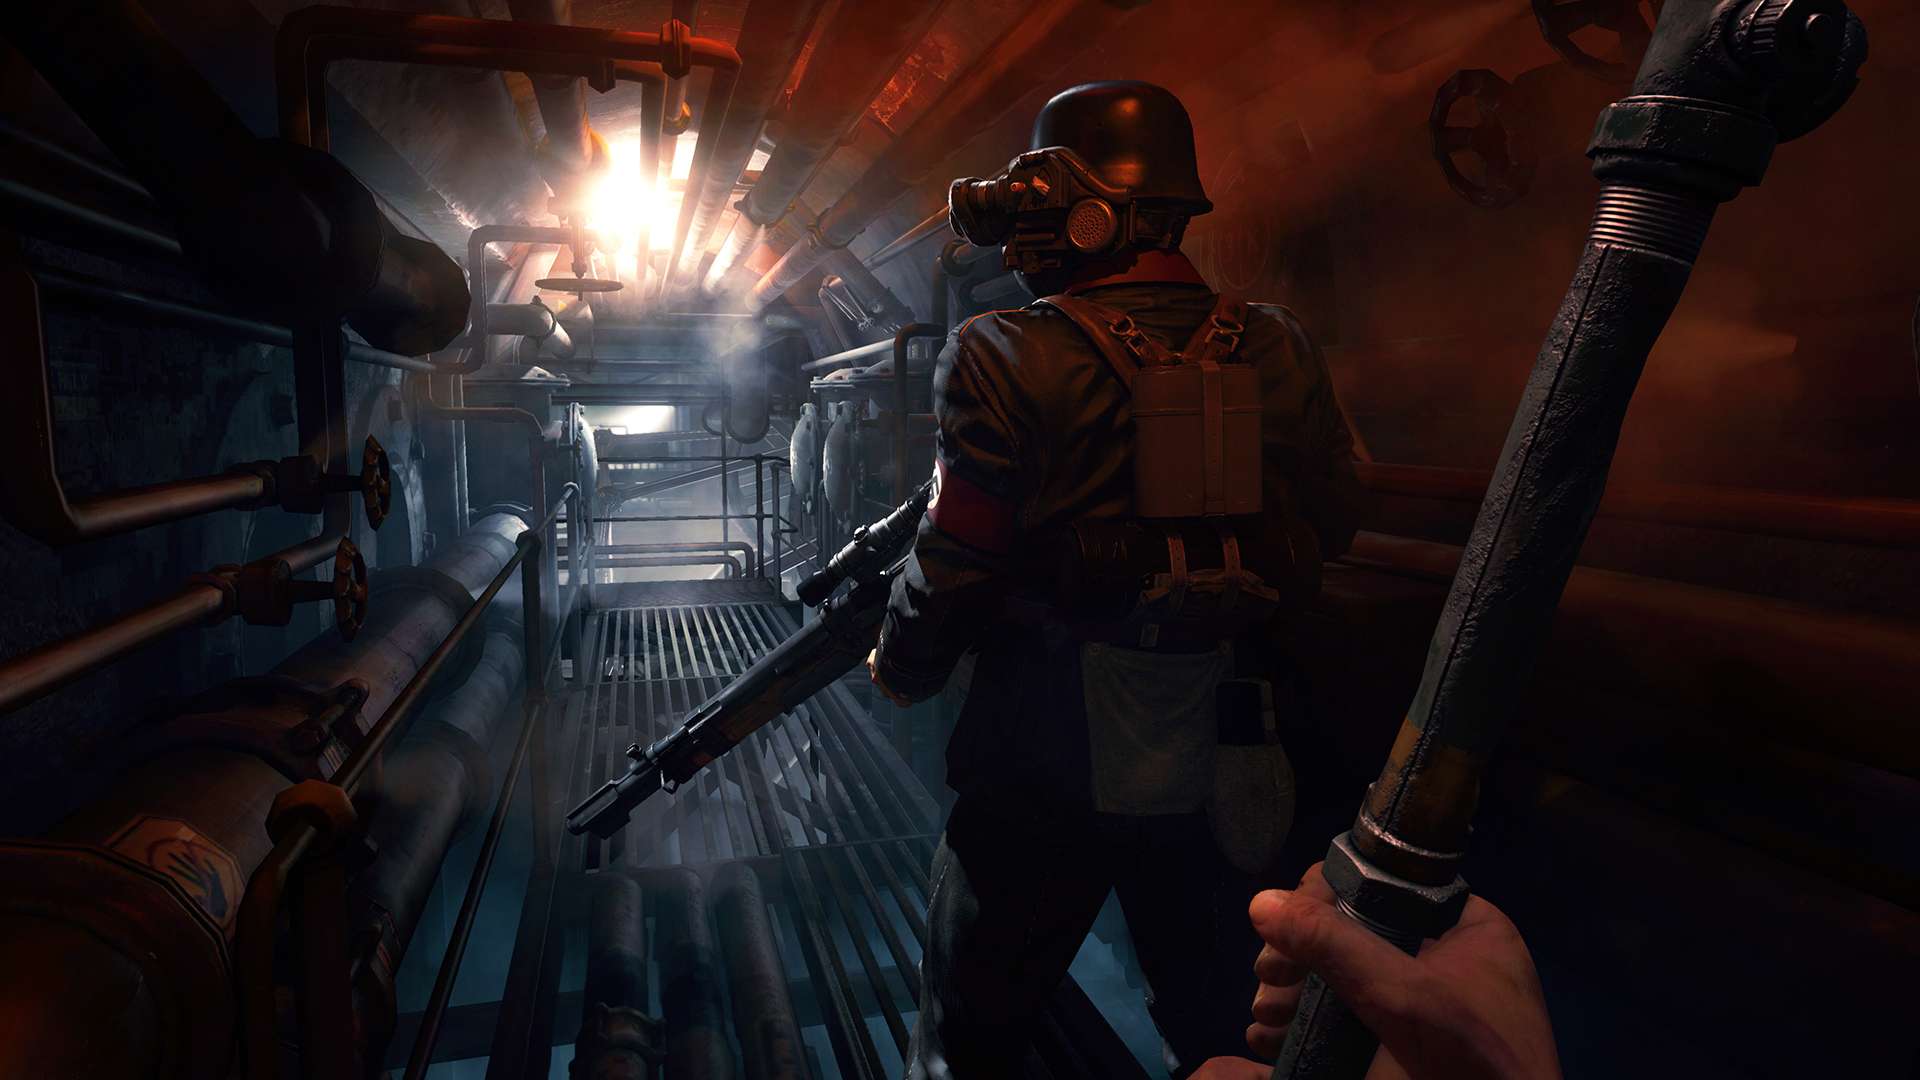 Wolfenstein: The New Order & The Old Blood for PC Review